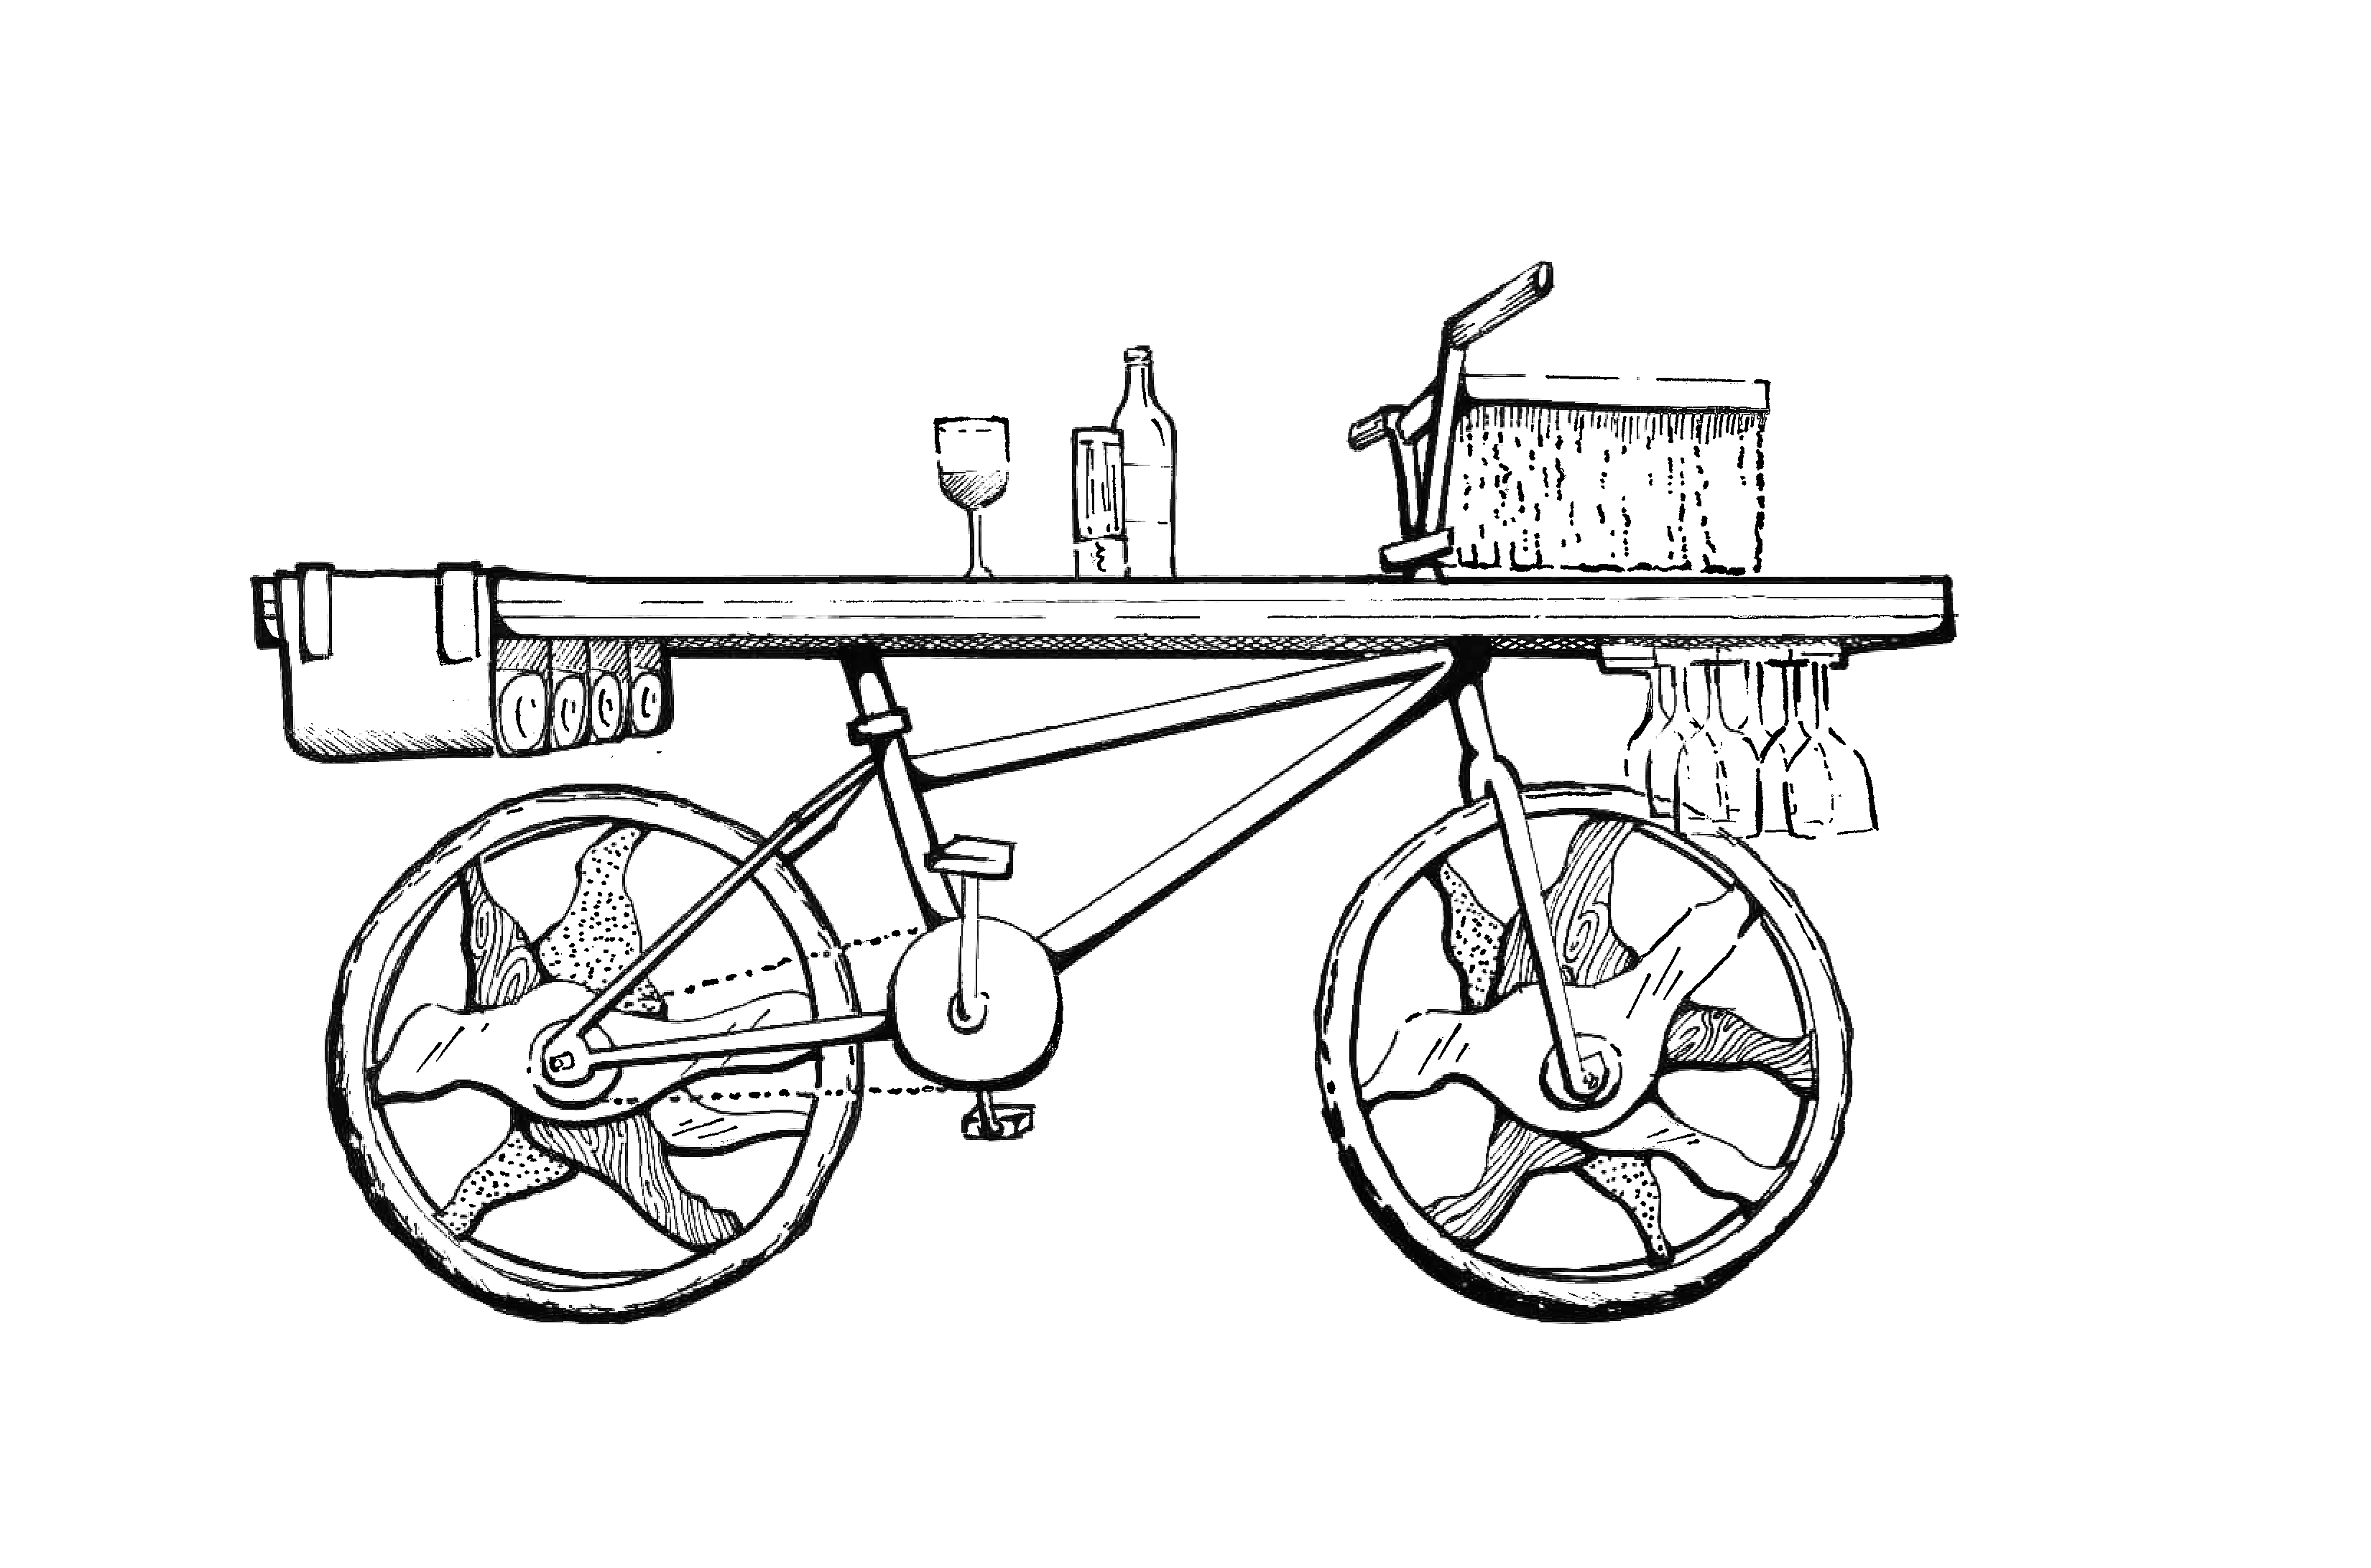 The Corked Cruiser